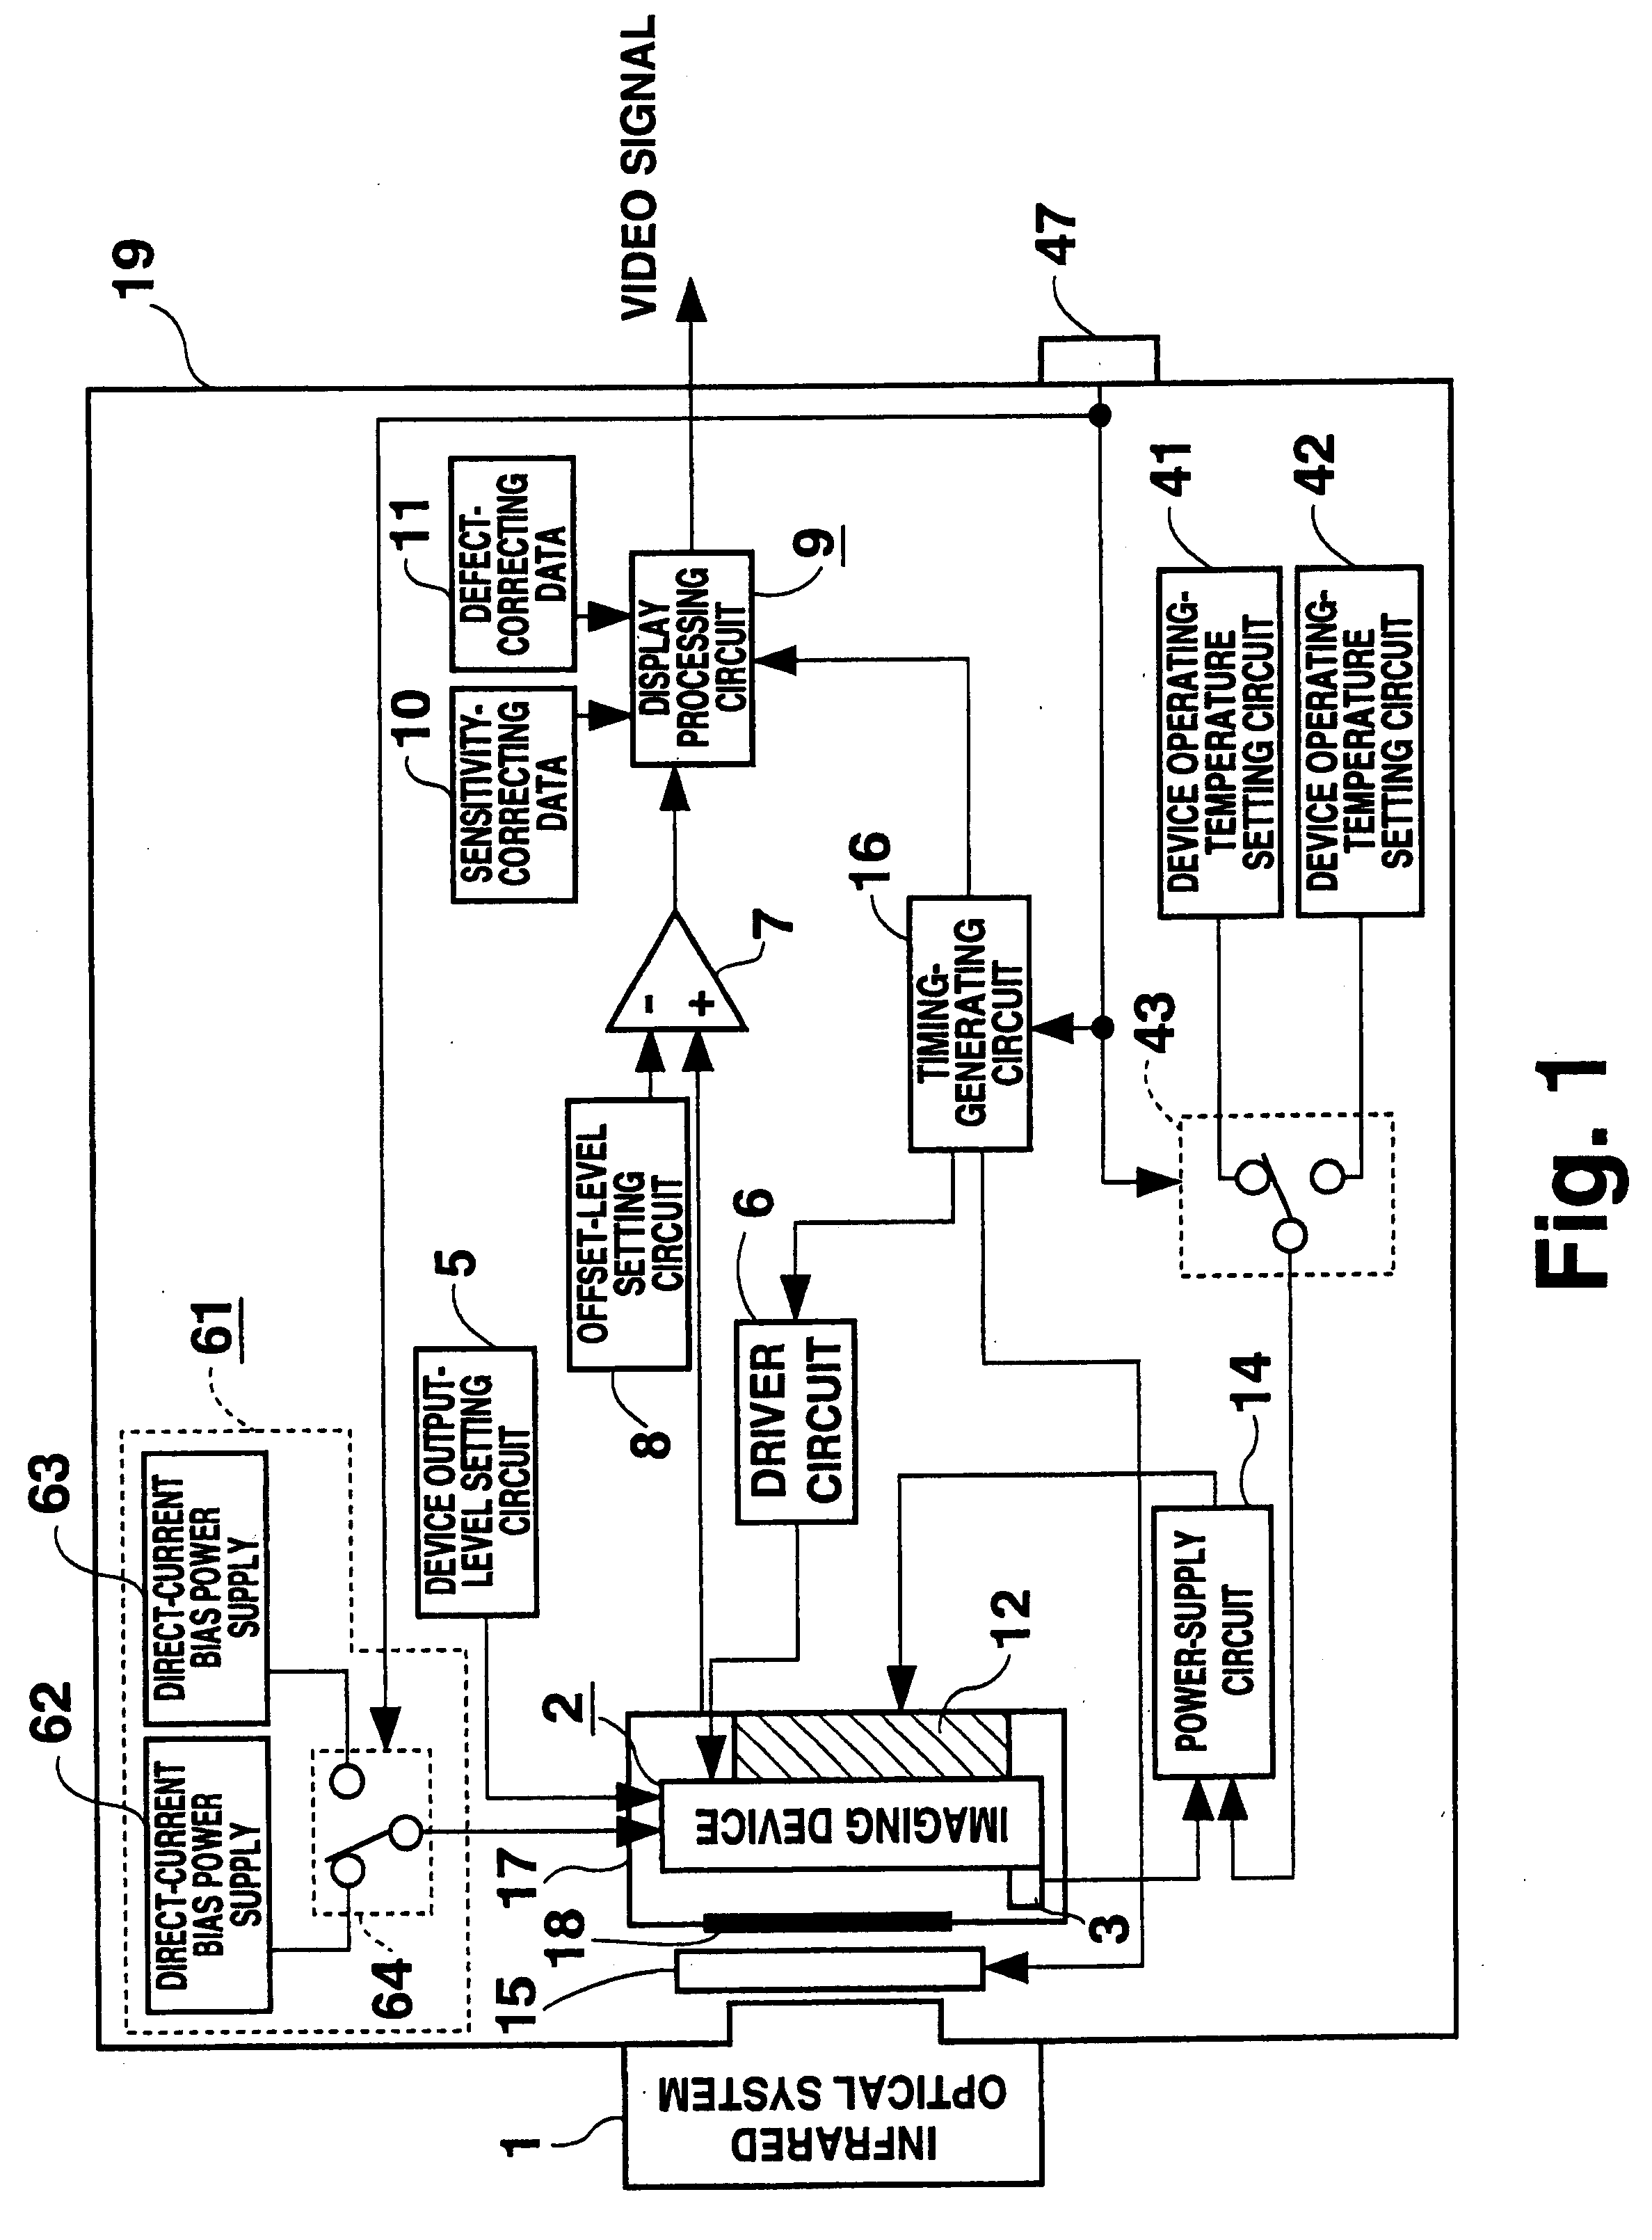 Infrared camera and infrared camera system having temperature selecting switch